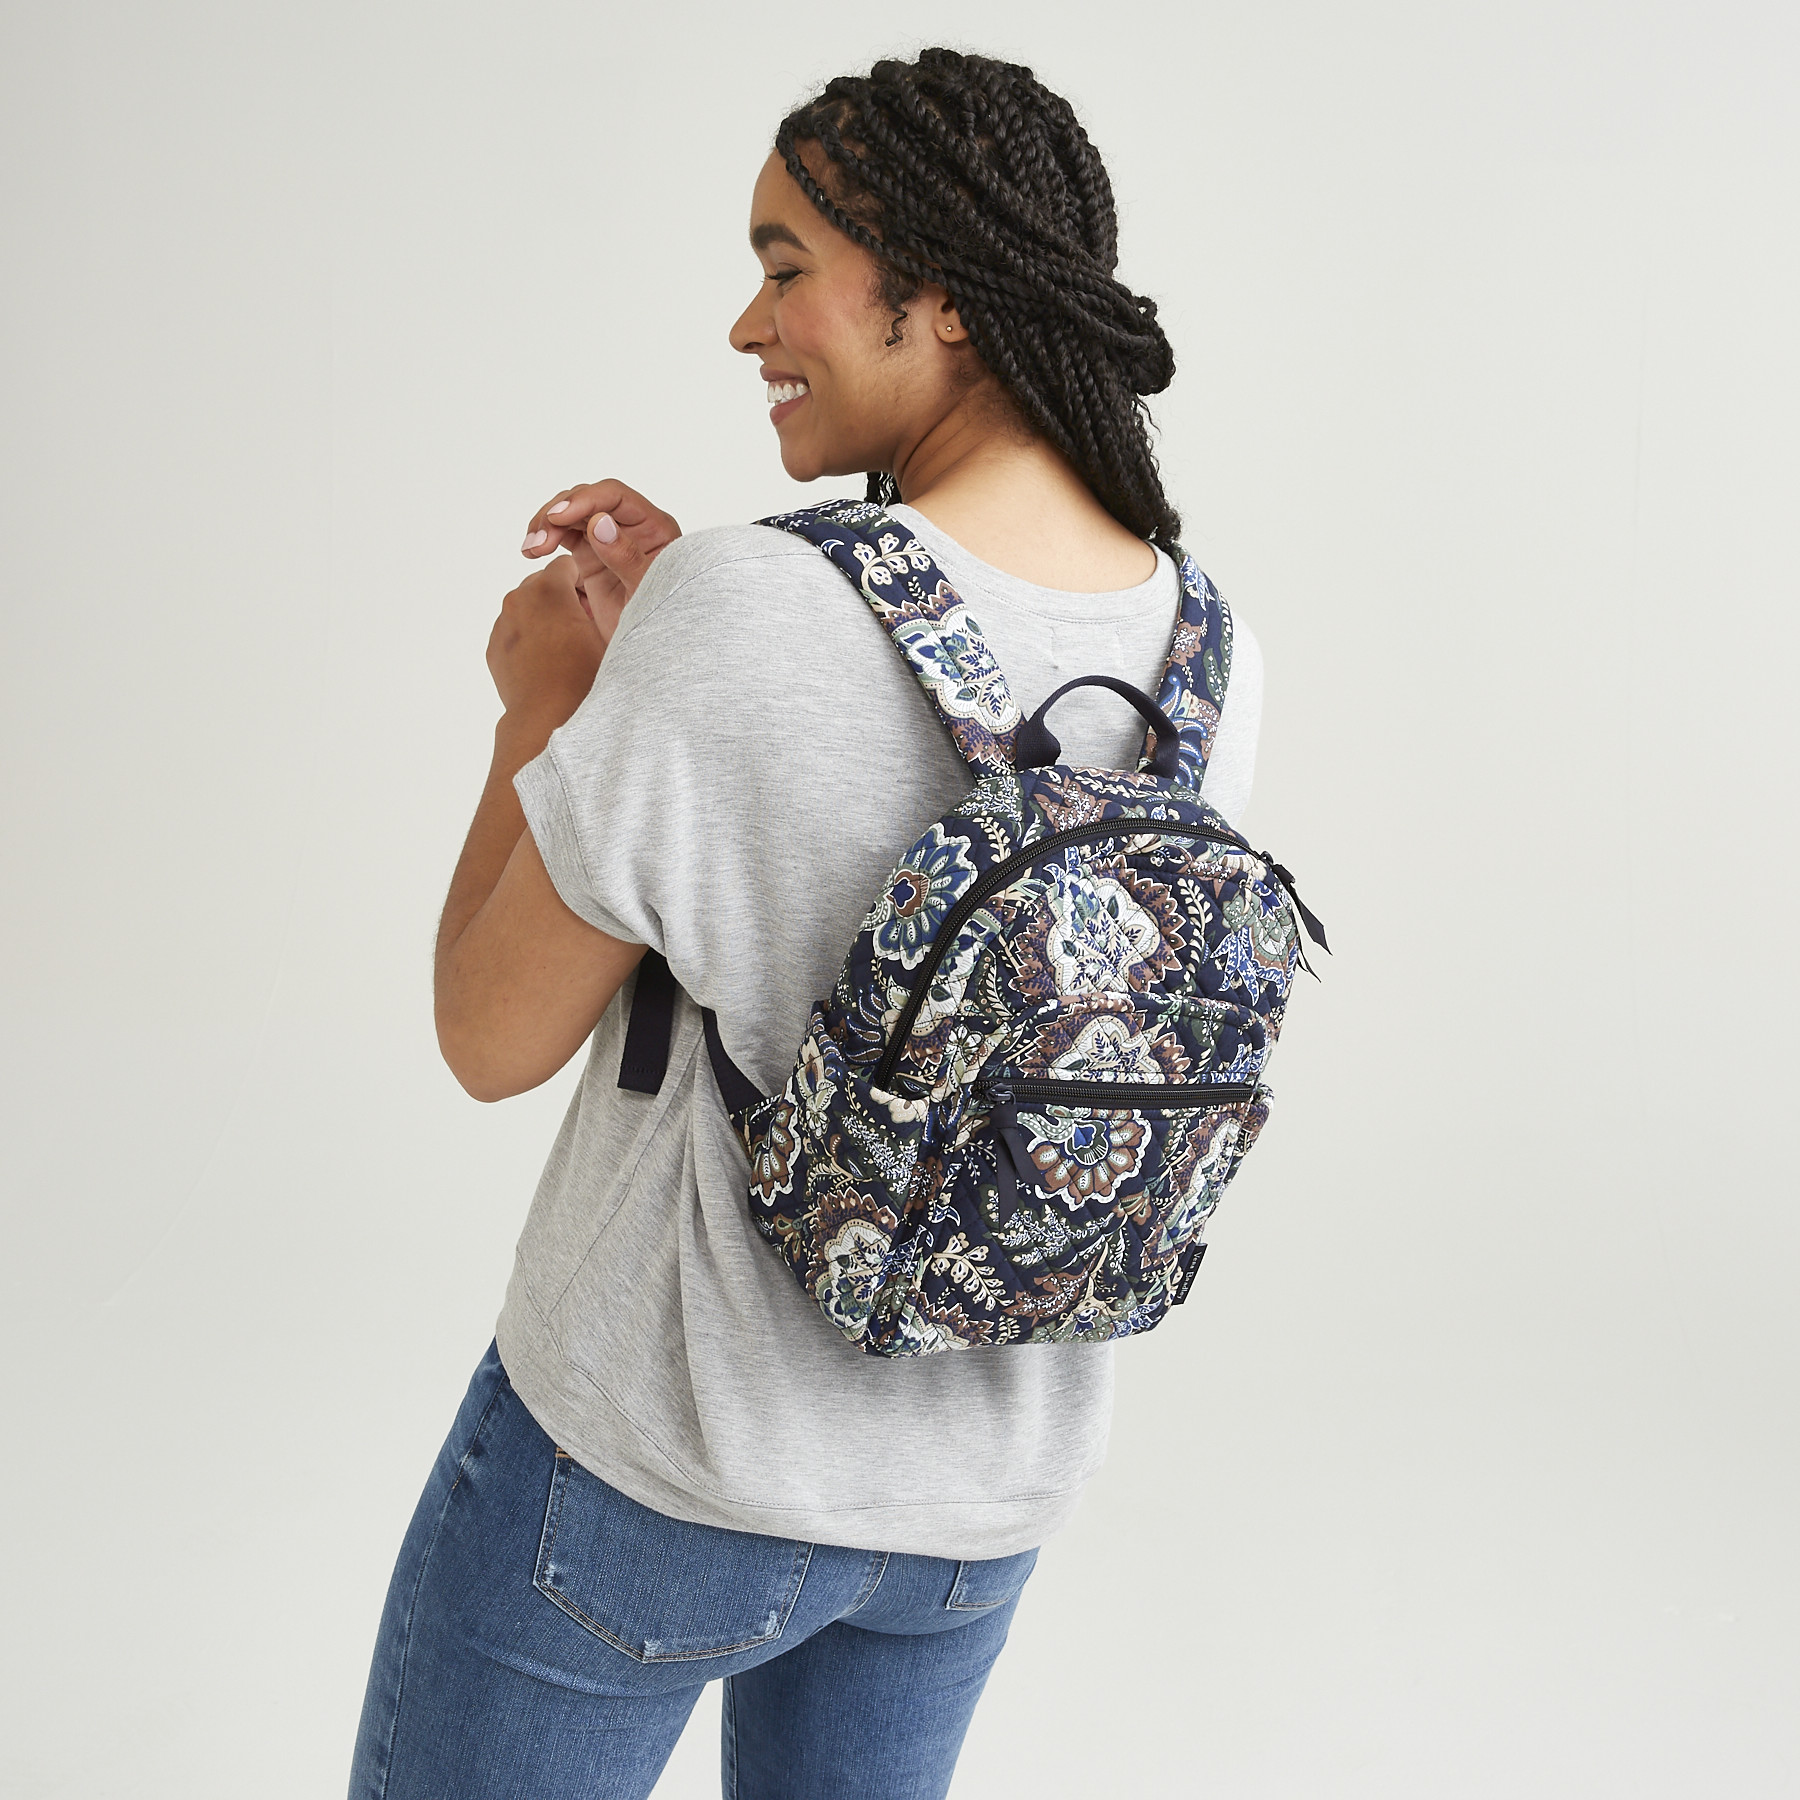 Vera Bradley Women's Recycled Cotton Small Backpack Pastel Plaid 